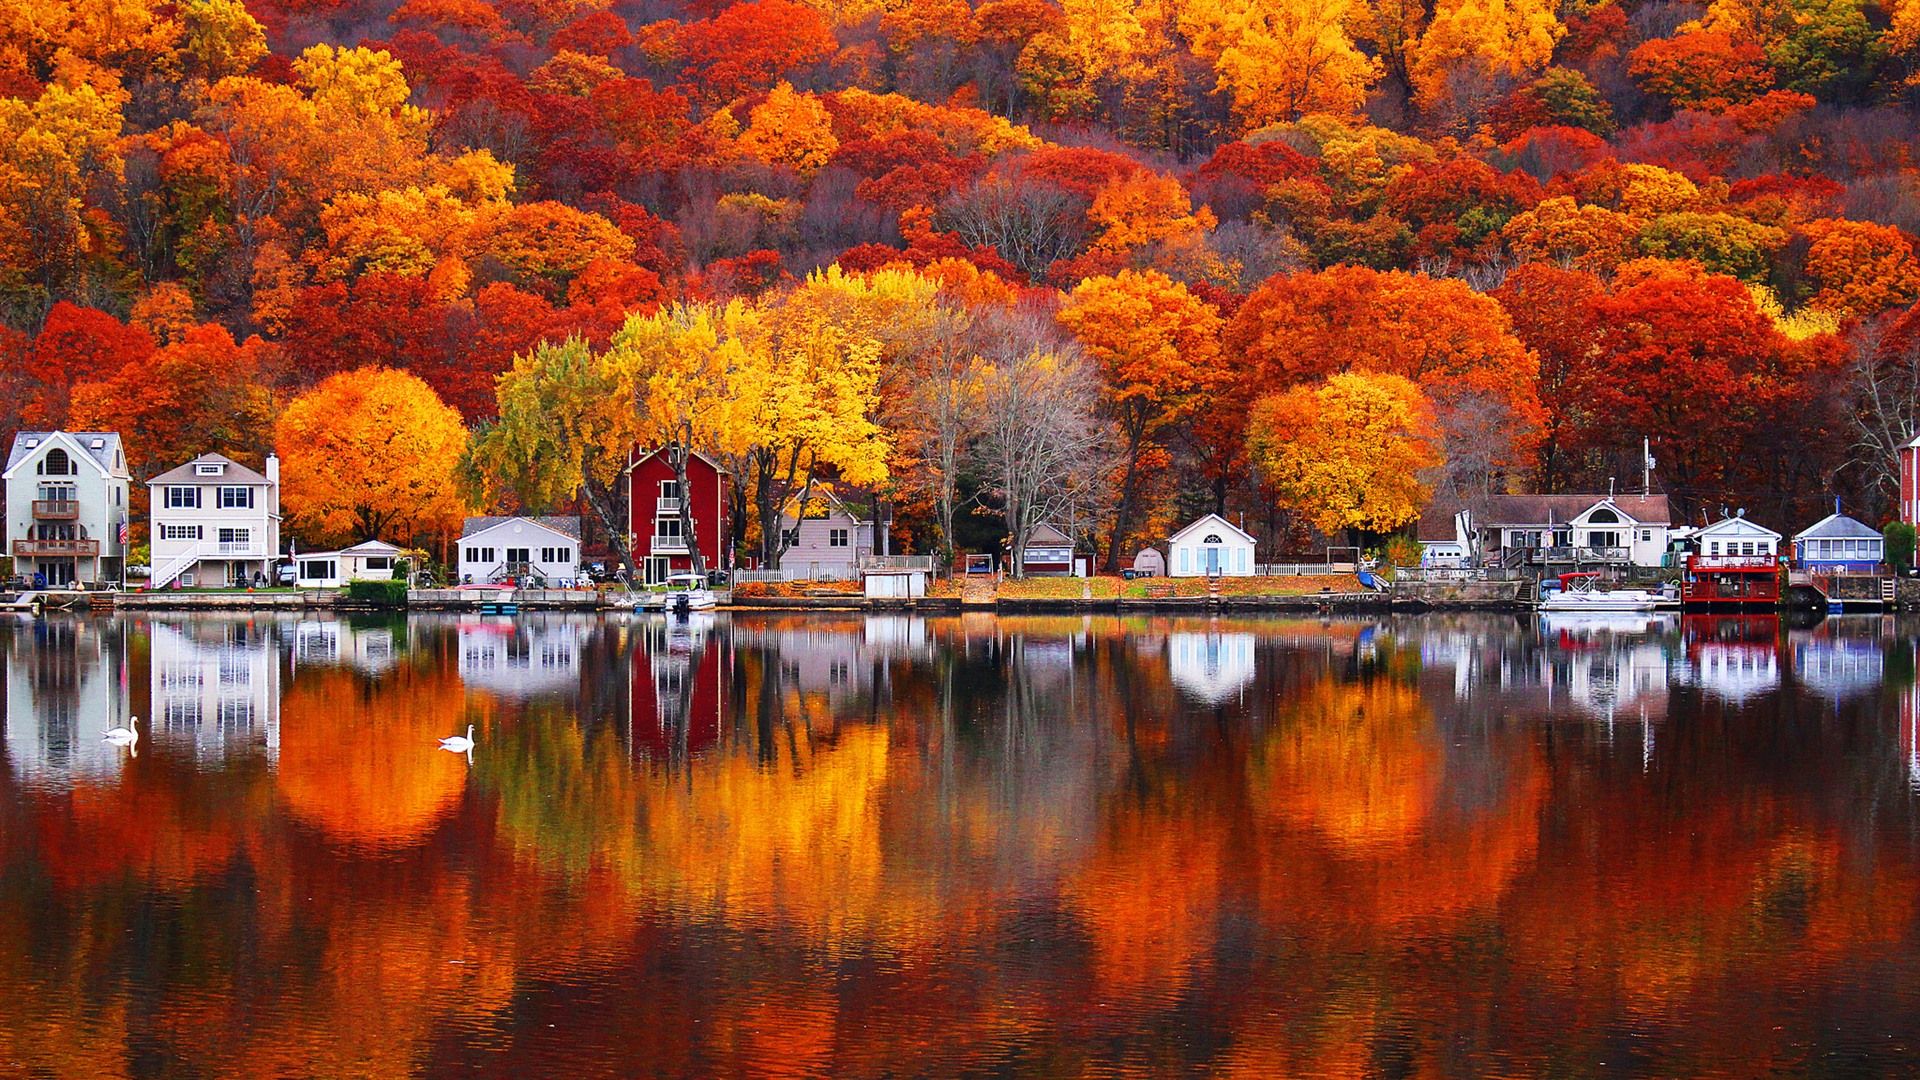 Wallpaper Autumn, lake, trees, houses, village, beautiful scenery 1920x1200 HD Picture, Image